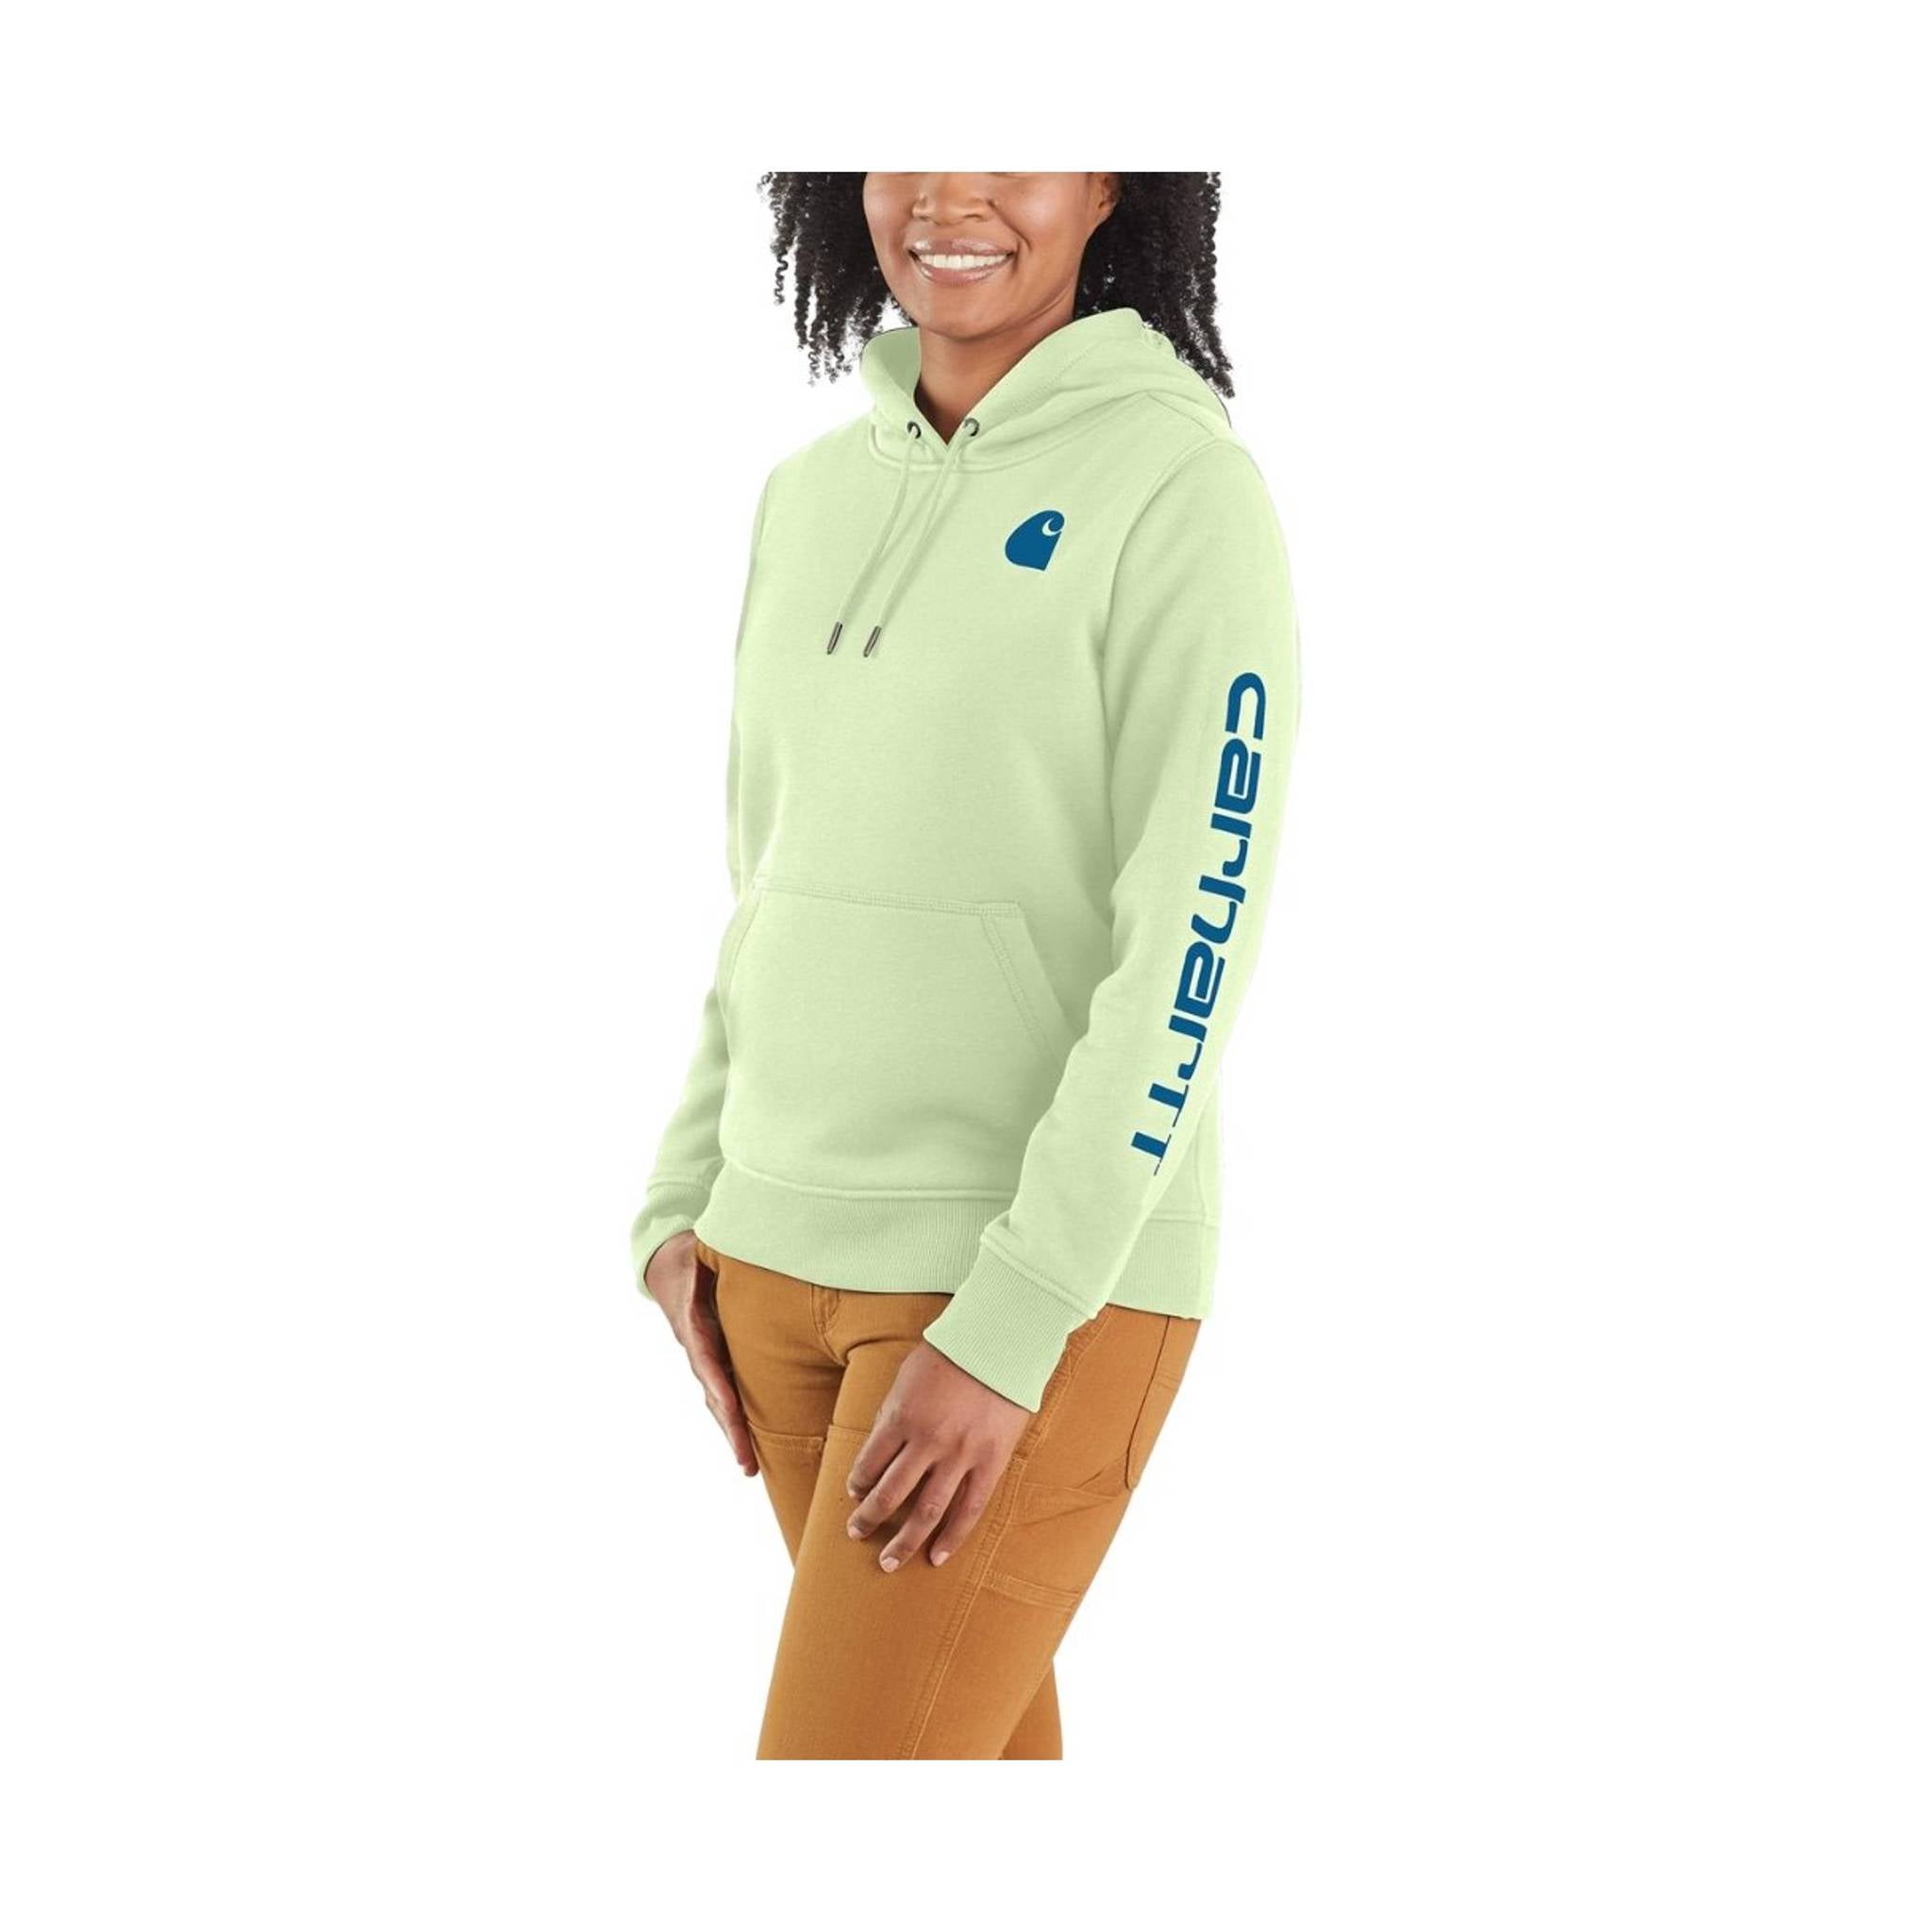 Carhartt Women's Relaxed Fit Midweight Logo Sleeve Graphic Sweatshirt -  Hint of Lime